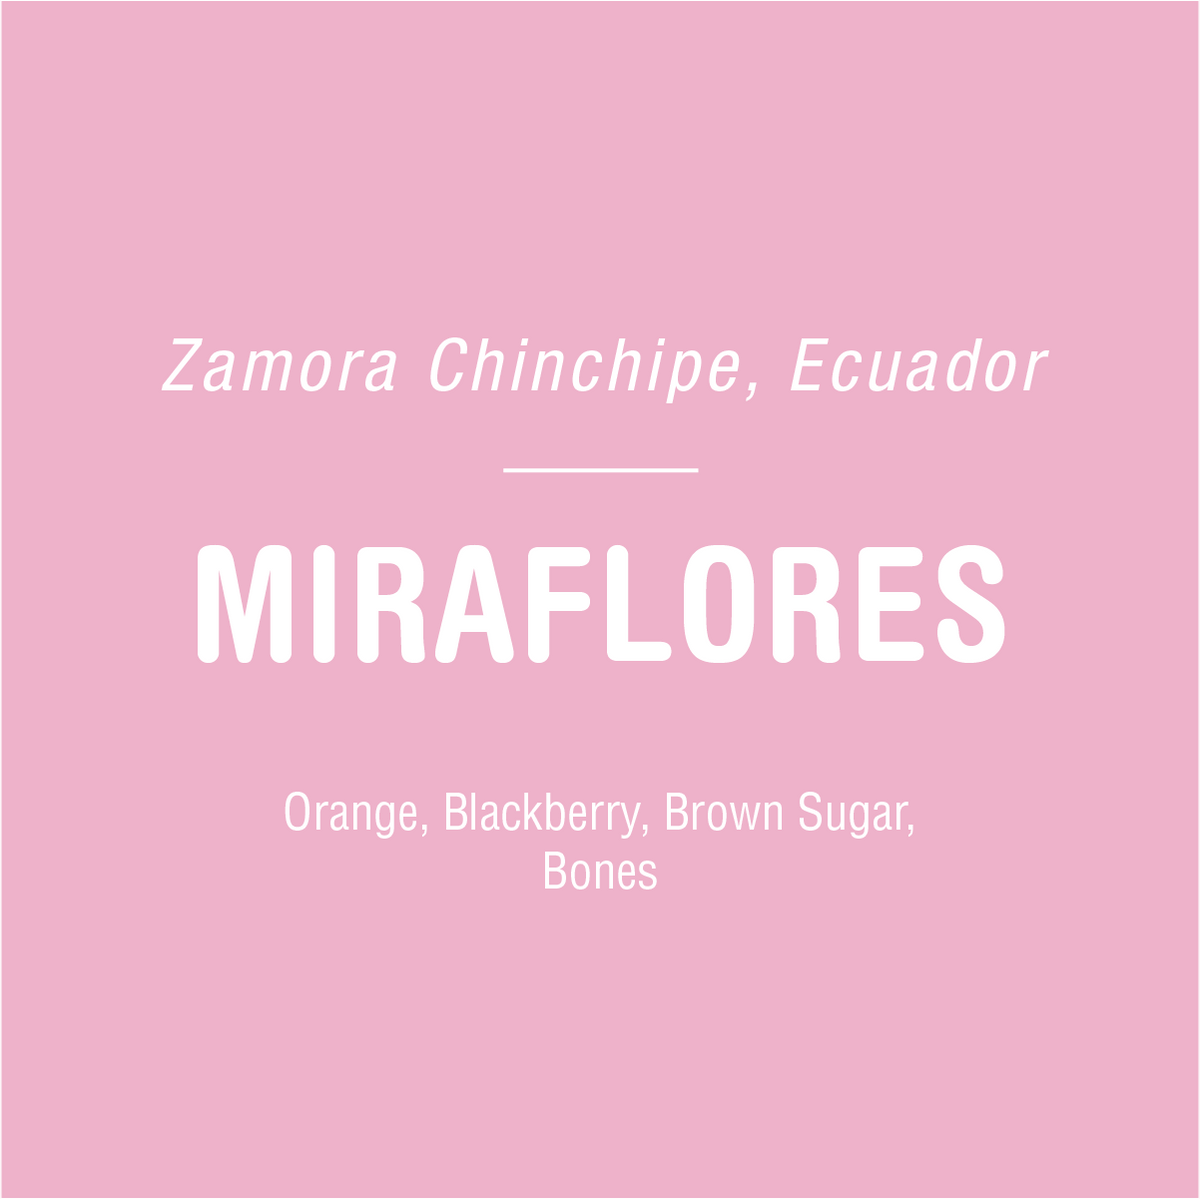 Graphic image featuring text "Miraflores - Ecuador - farm blend coffee" with flavor profile "orange, blackberry, brown sugar" on a pink background from Tandem Coffee Roasters.